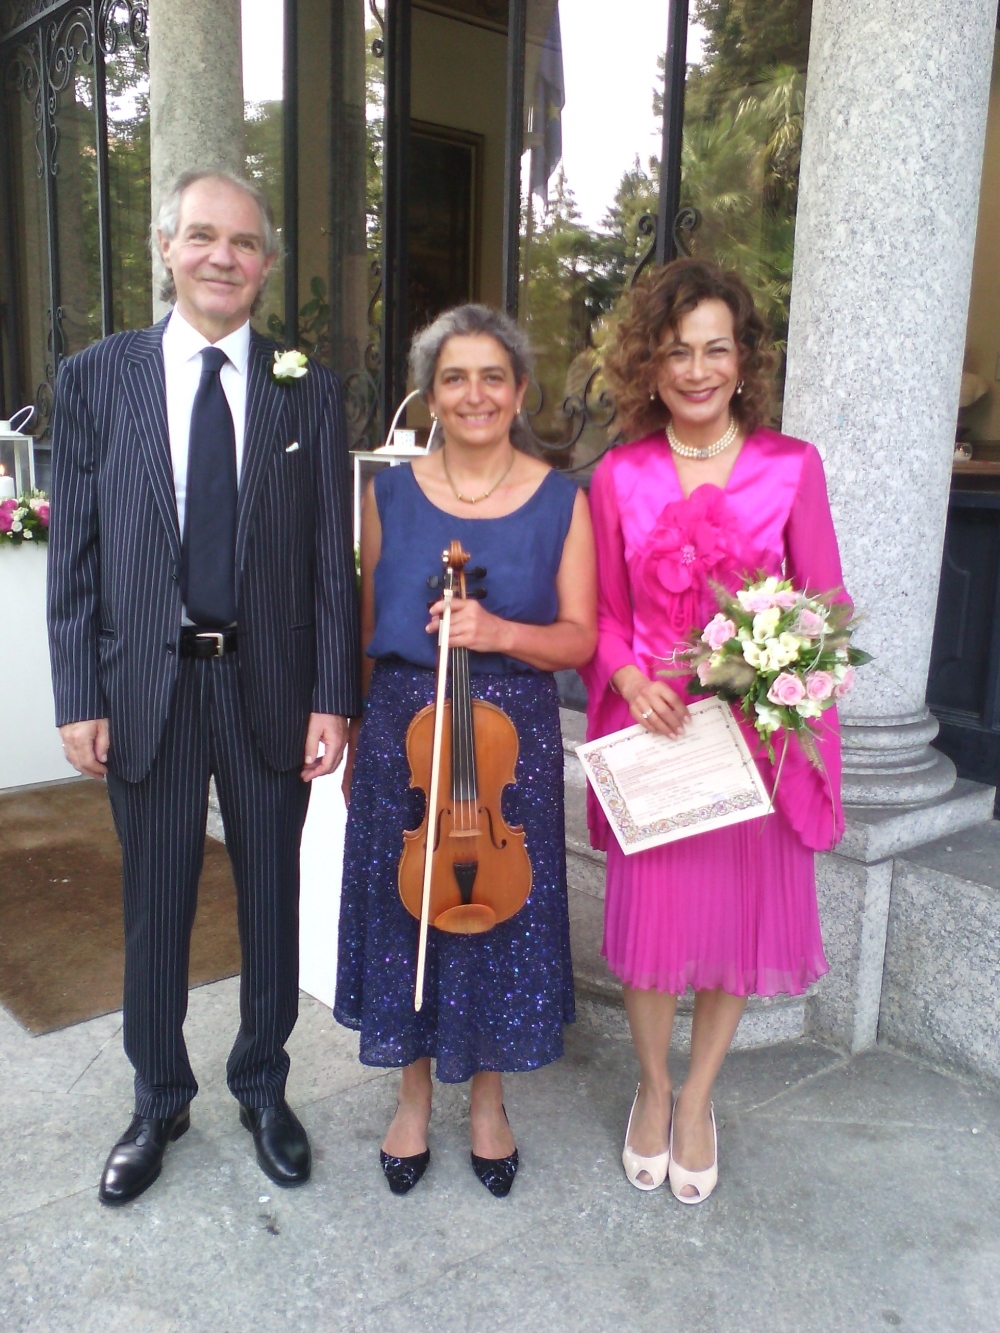 One more couple who chose me as their wedding musician for their civil ceremony, in Villa Confalonieri, Merate, Italy